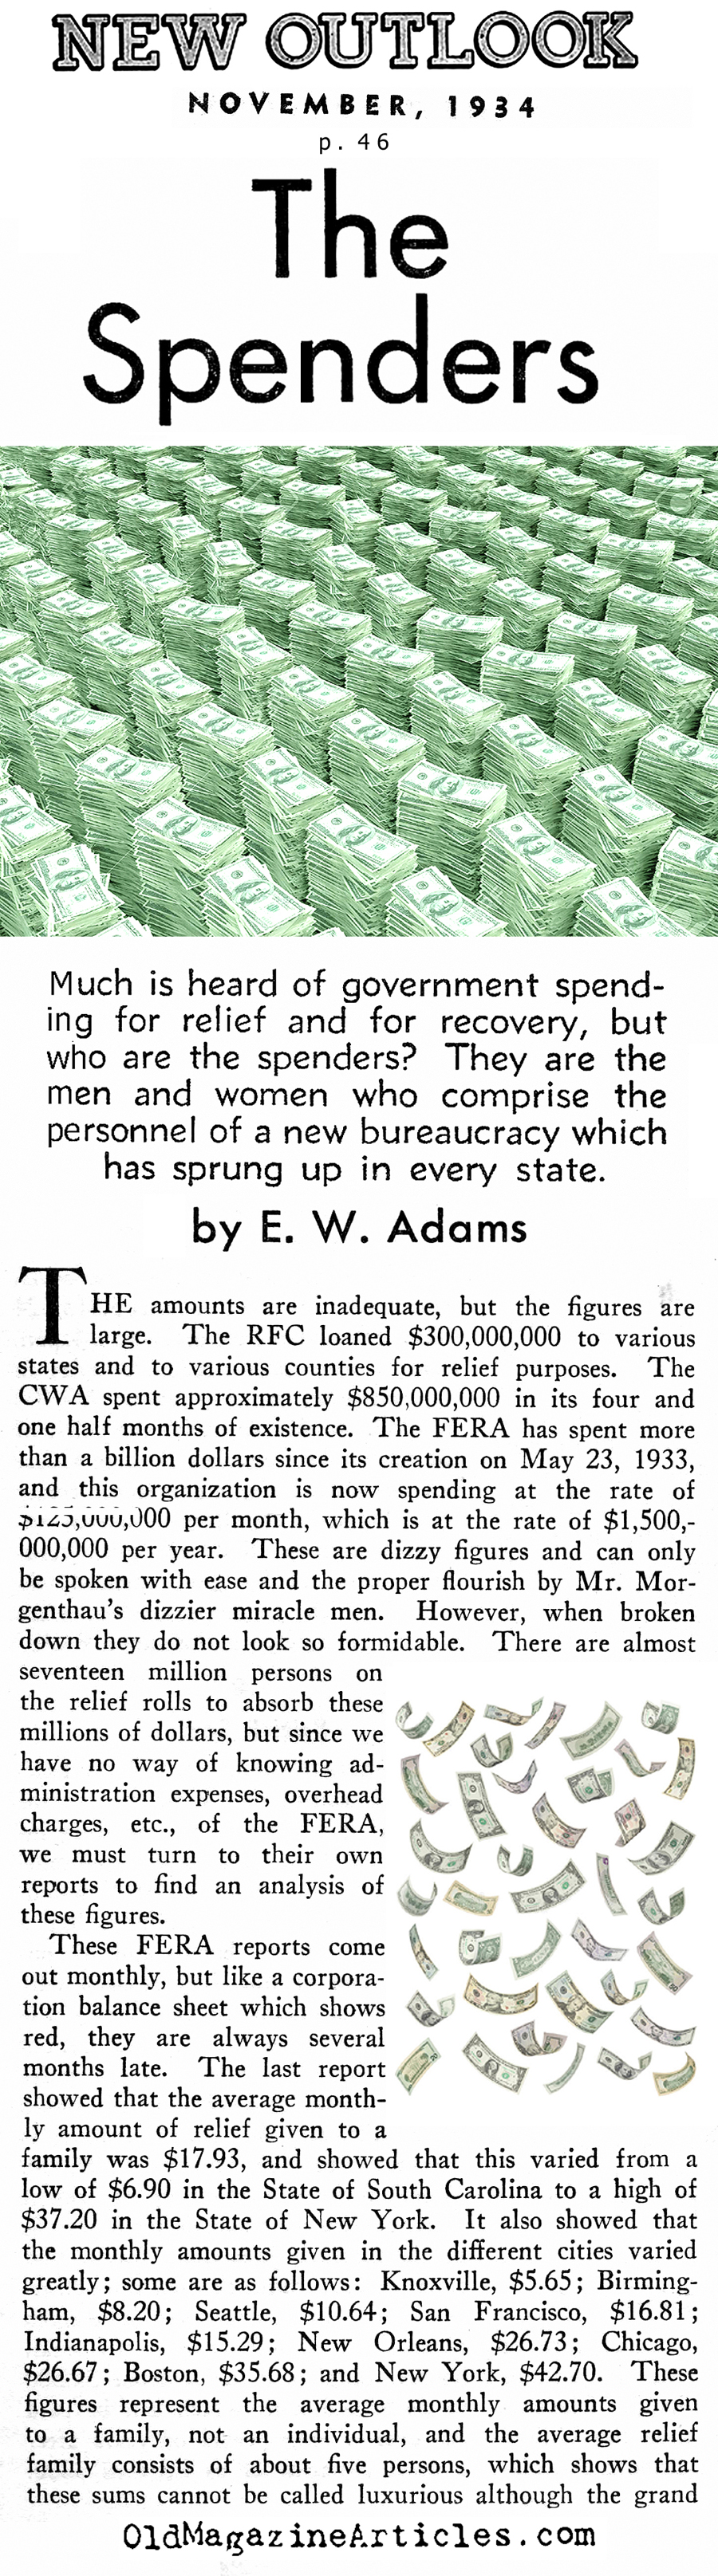 The Big Spenders in Washington (New Outlook Magazine, 1934)